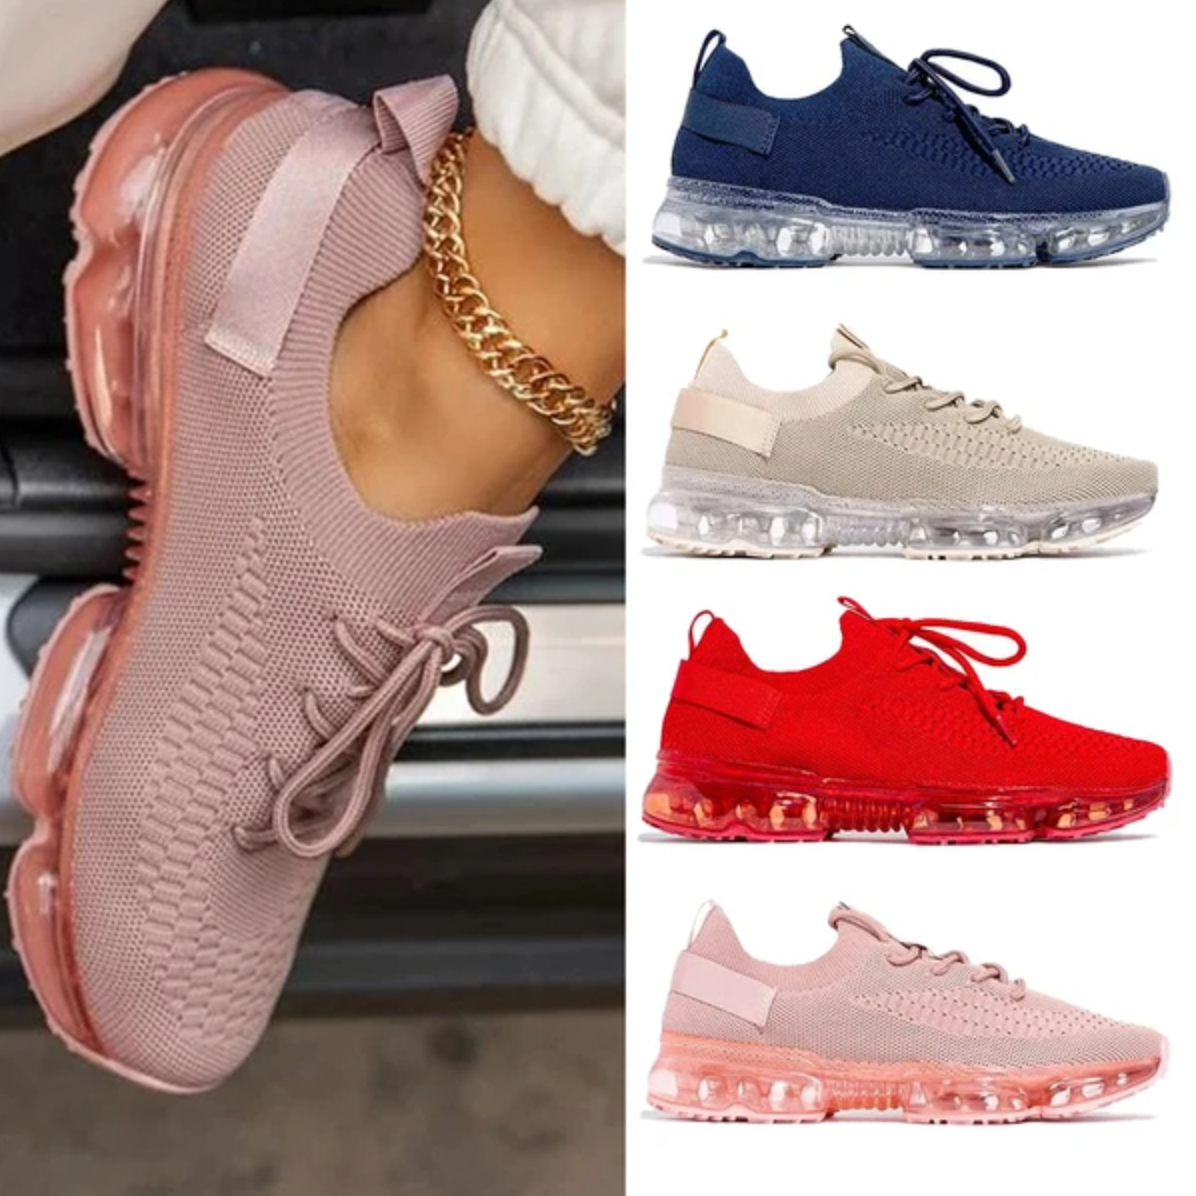 Women's Comfy Air Cushion Sneakers, Breathable Shoes Walking Running Shoes [Limited time offer: Buy 2 Save More 15%]